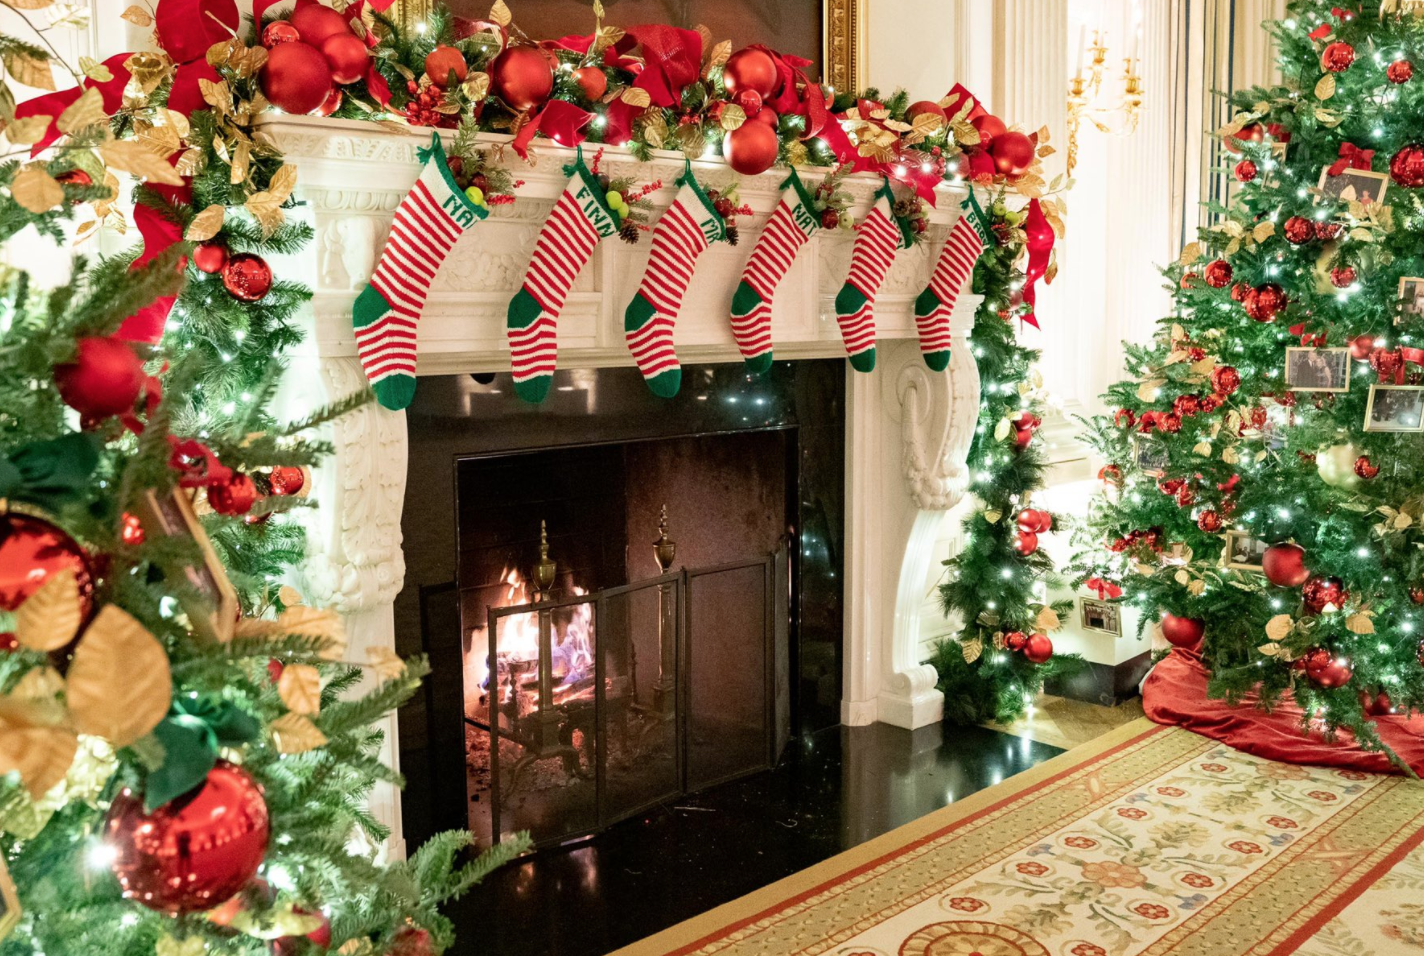 Jill Biden just unveiled White House Christmas decorations – here’s how they compare to Melania Trump’s